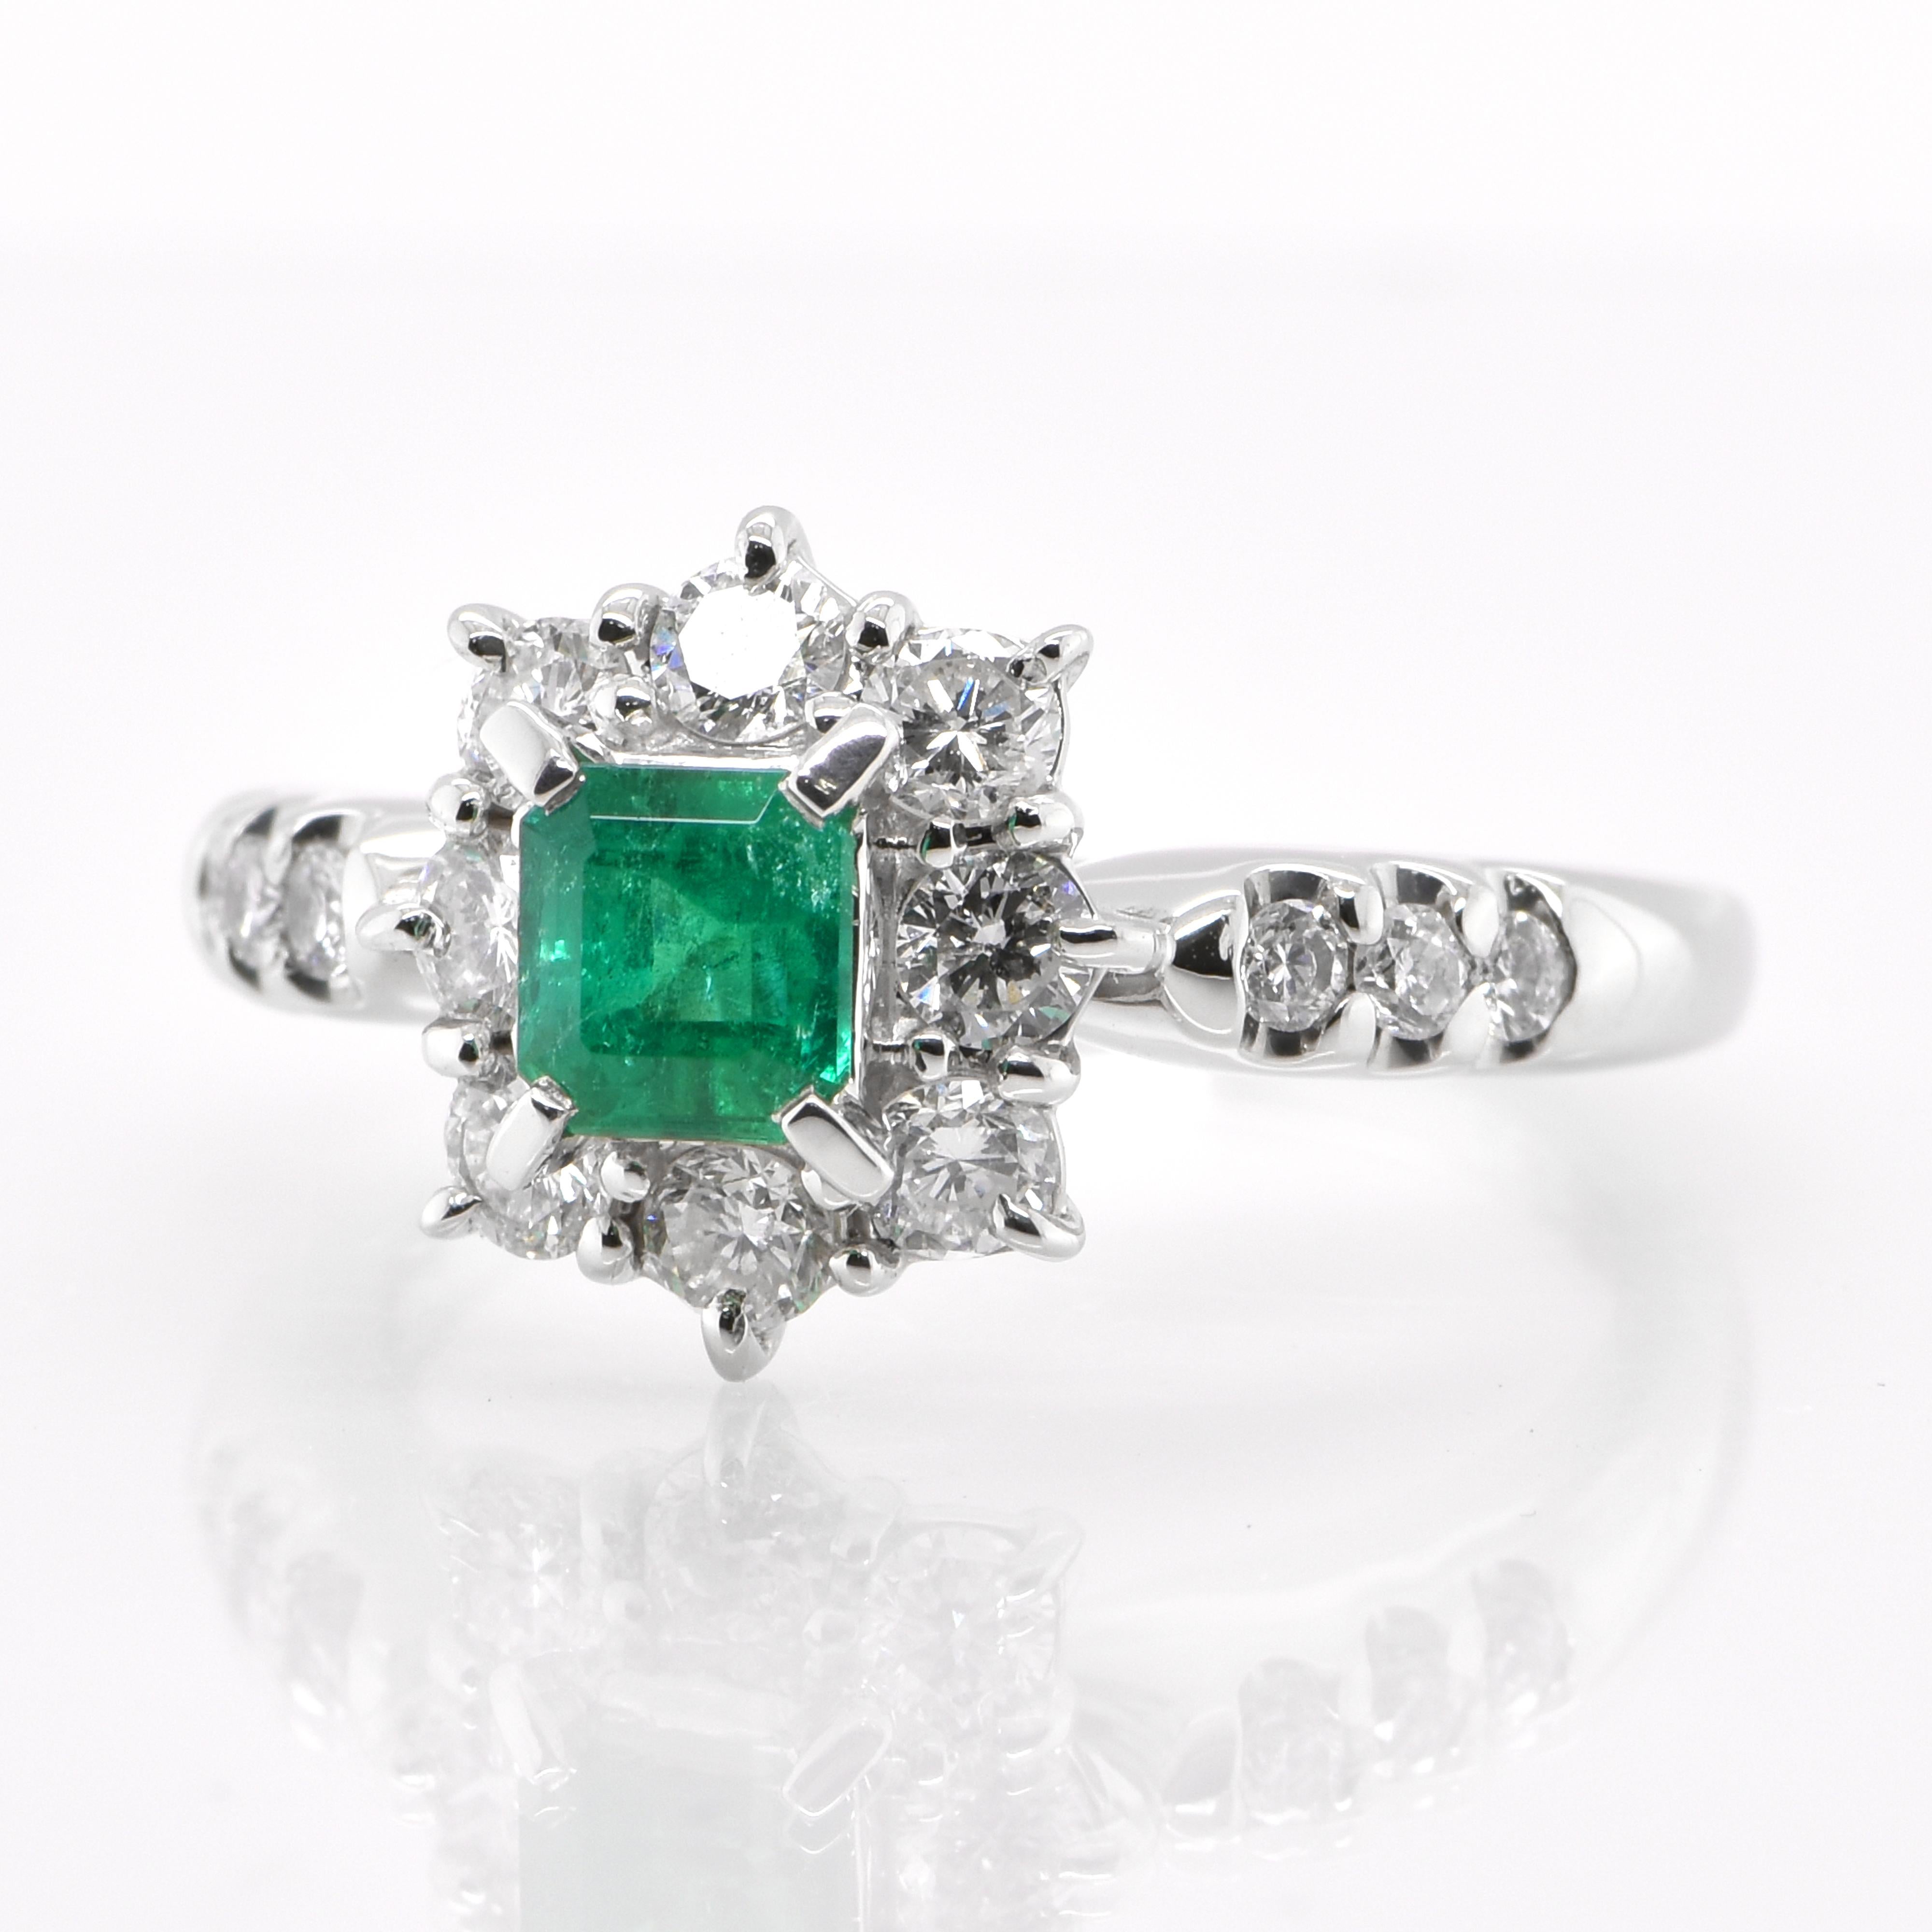 A stunning Halo Ring featuring a 0.48 Carat Natural Emerald and 0.81 Carats of Diamond Accents set in Platinum. People have admired emerald’s green for thousands of years. Emeralds have always been associated with the lushest landscapes and the